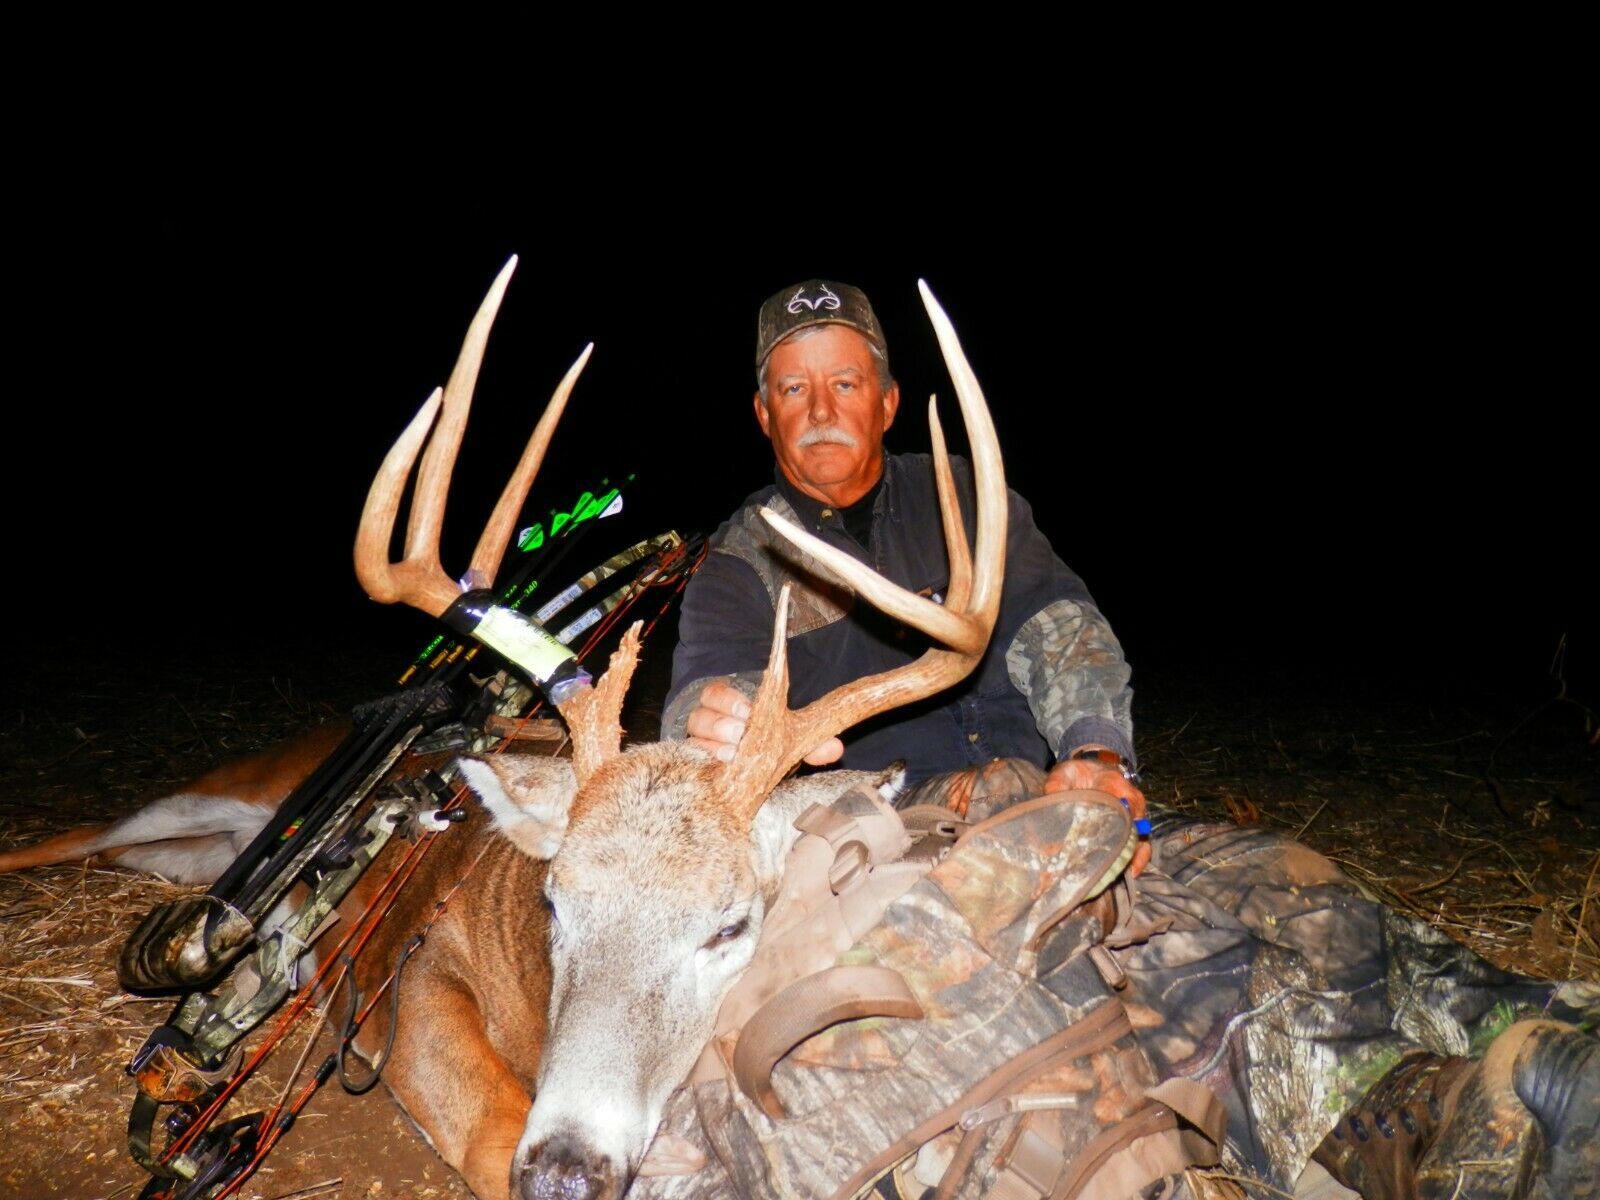 2021 Kansas Whitetail Bow Hunt Your Choice On Dates, Private Lease. Unit 14